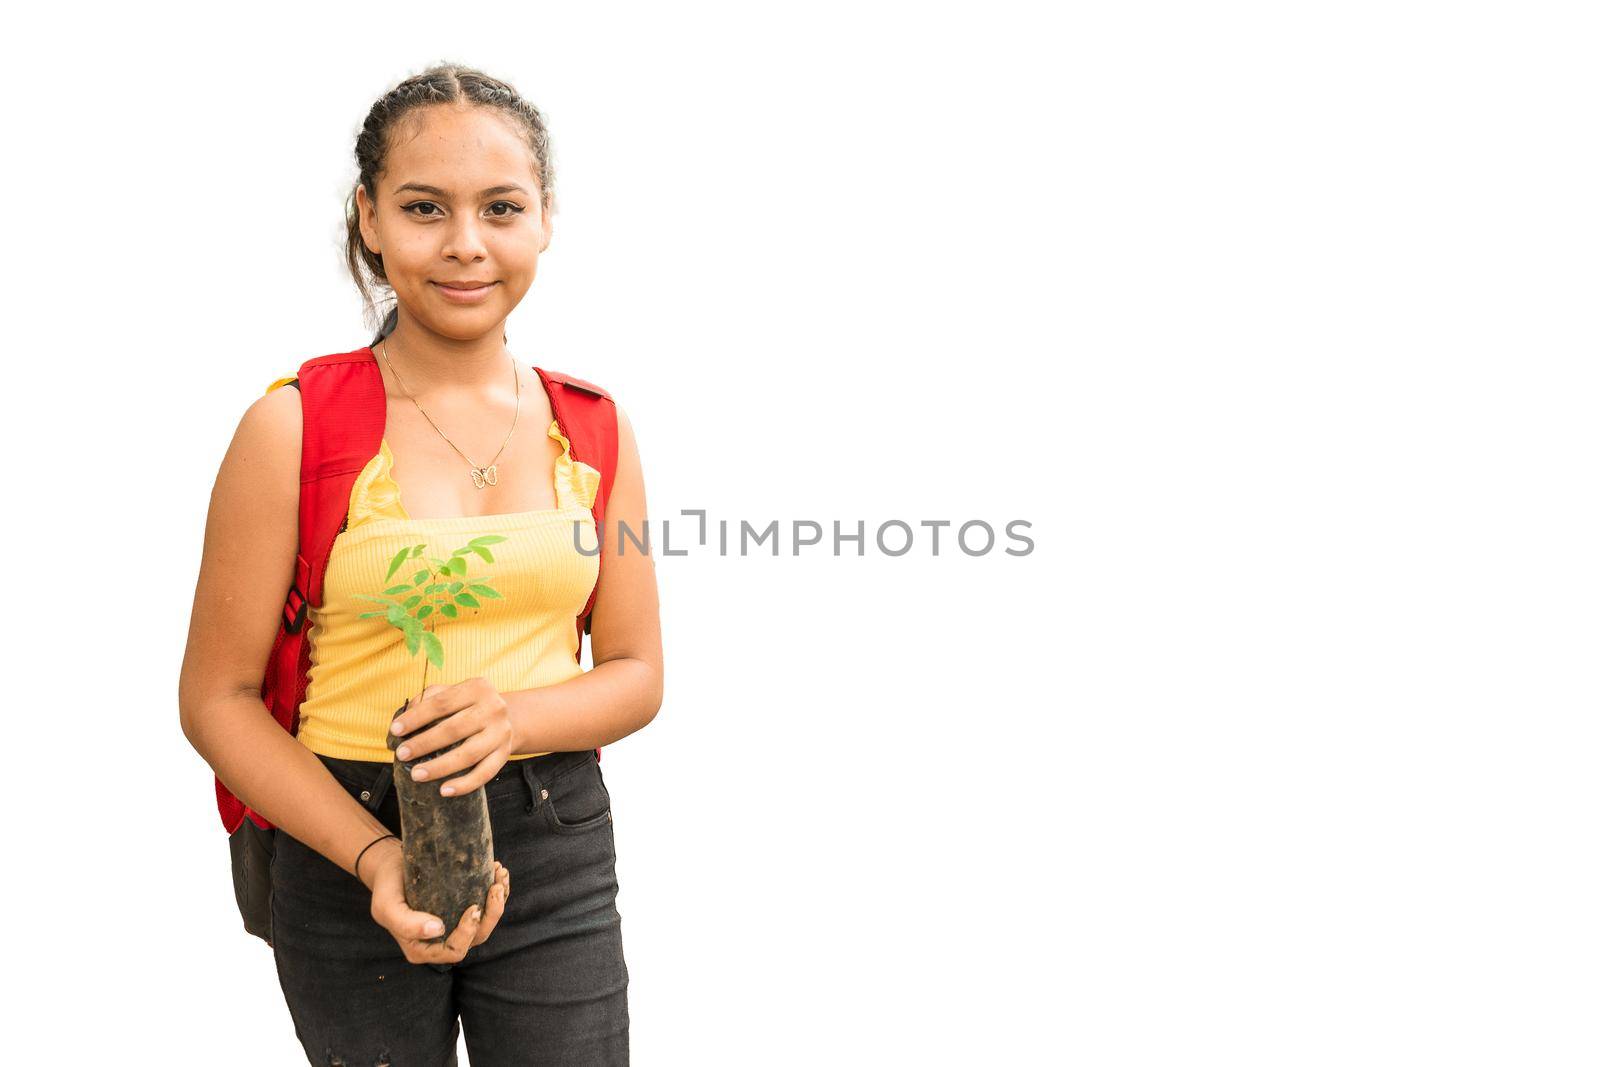 Portrait of a Latin girl holding a plant in a plastic bag watching the camera by cfalvarez